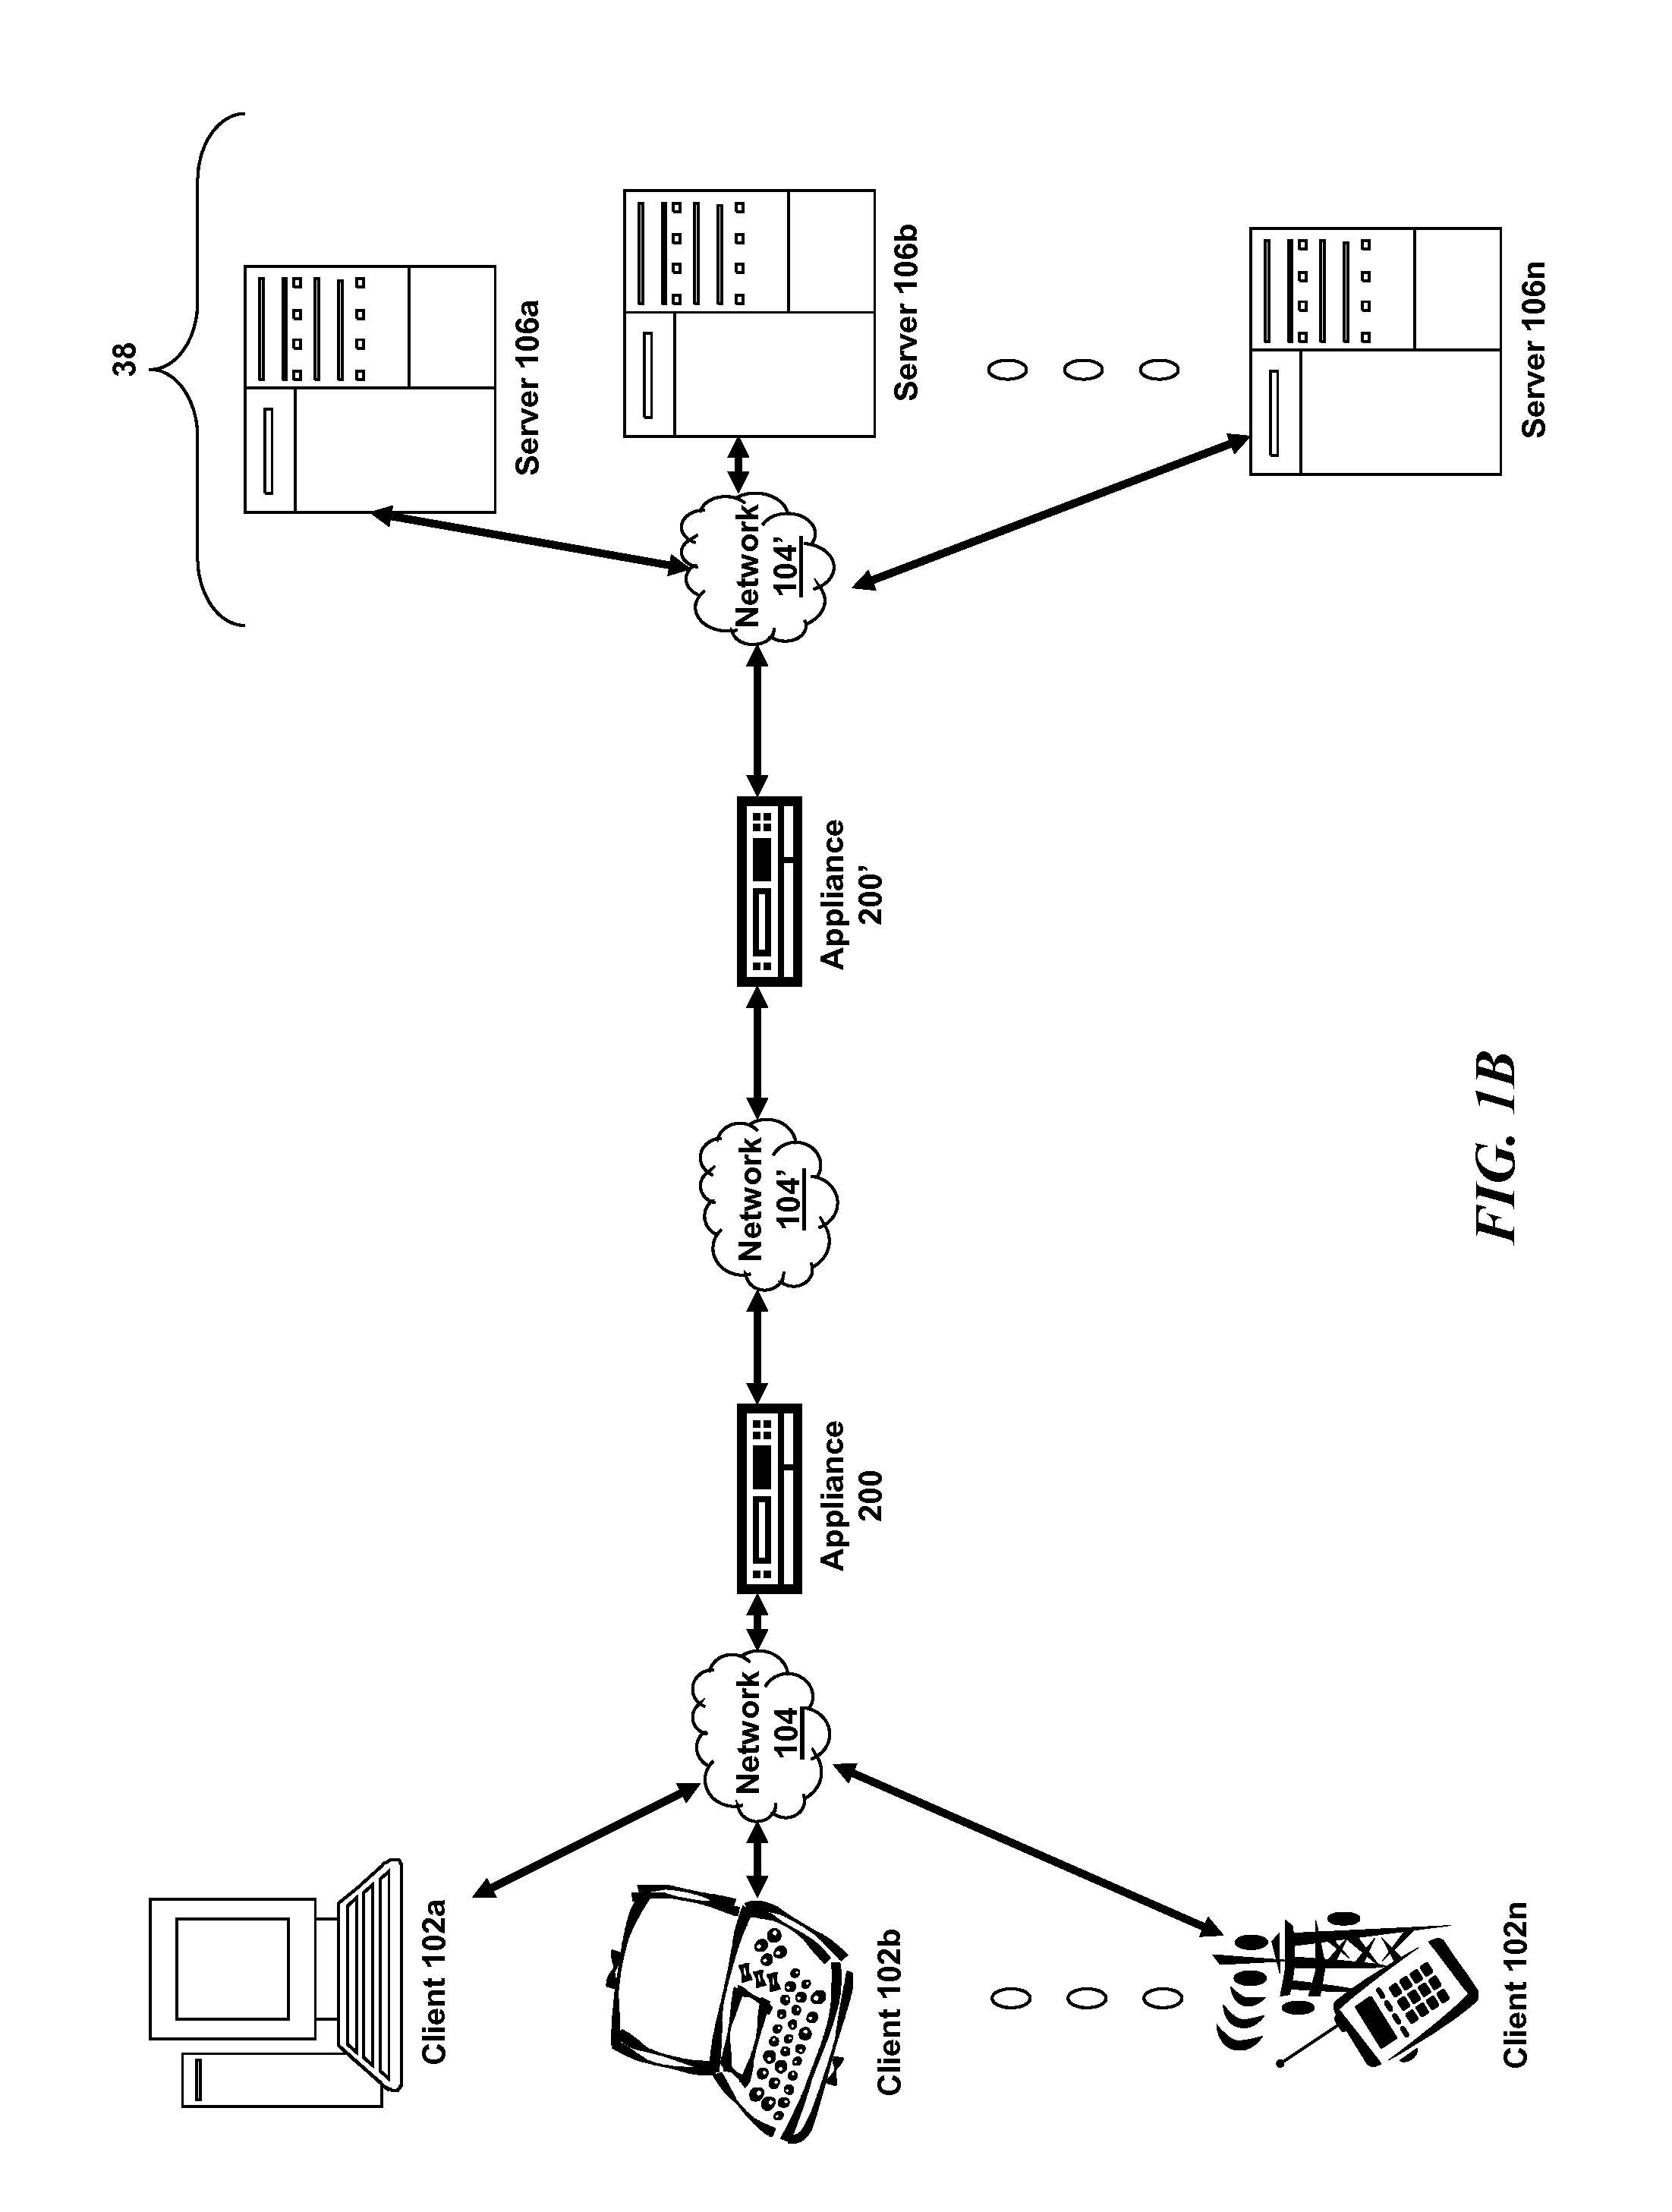 Systems and methods for cloud-based probing and diagnostics